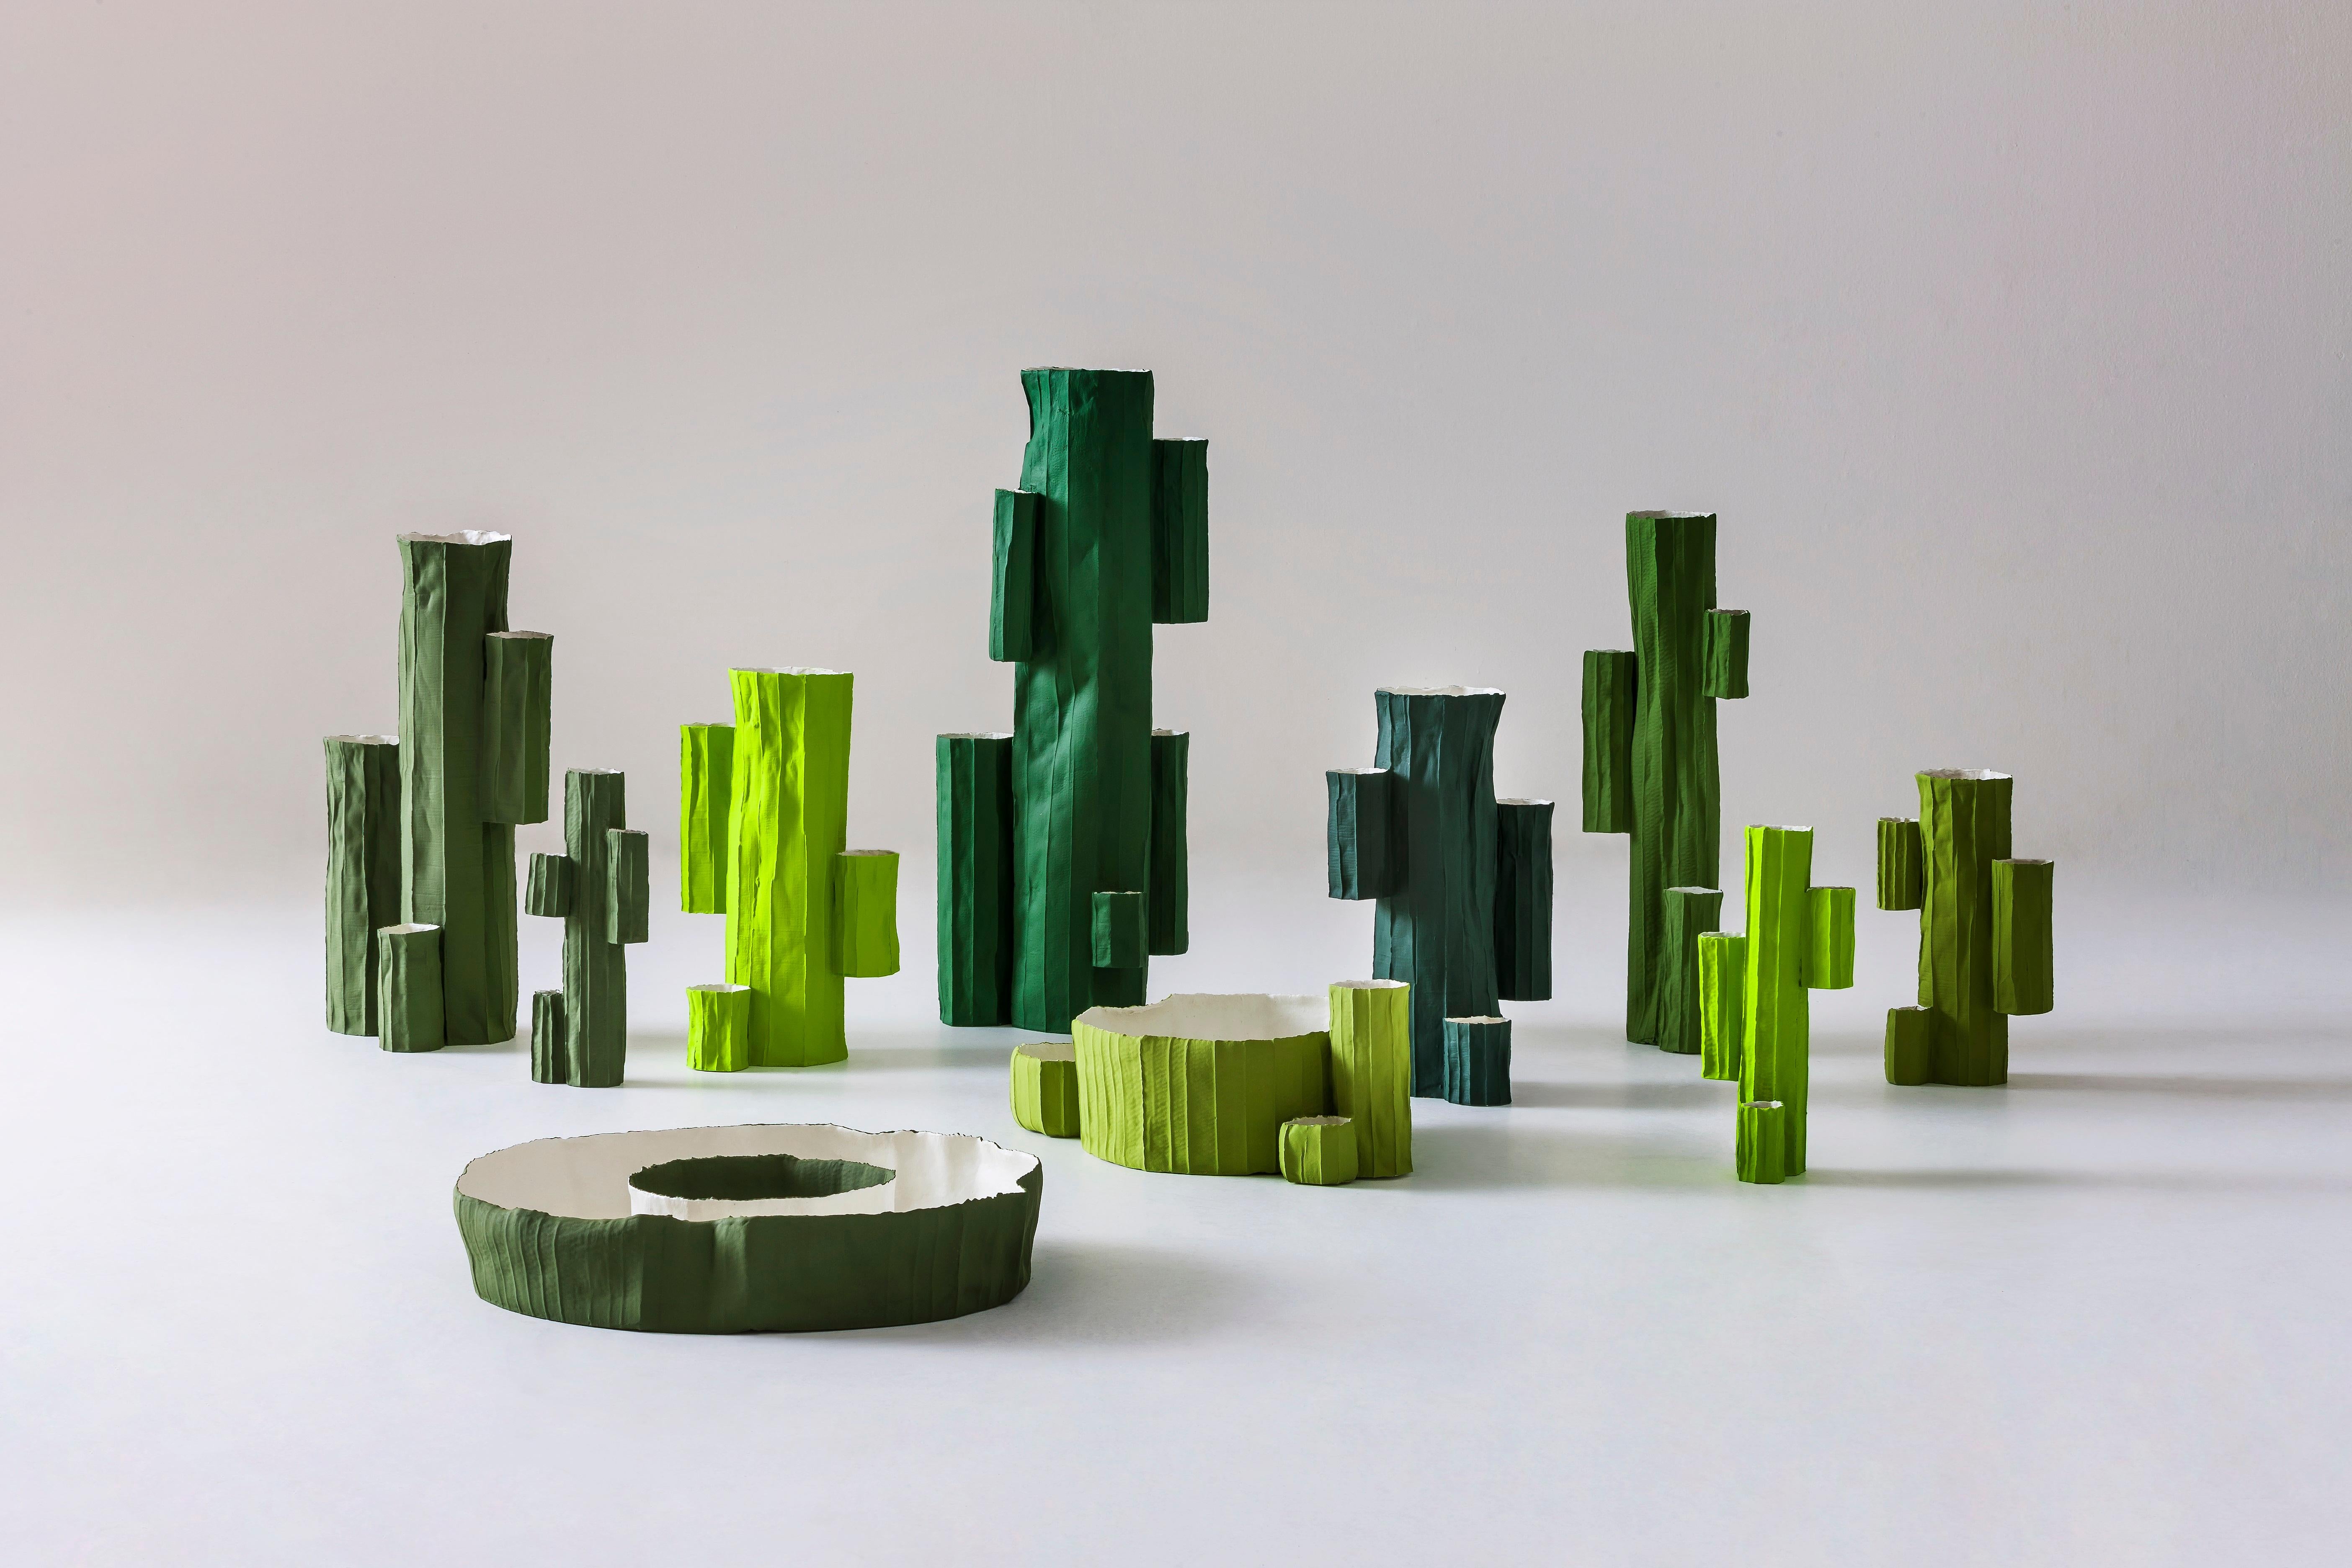 Handcrafted of paper clay, a ductile compound obtained by adding paper pulp and natural fibers to the clay-base, this decorative vase by Paola Paronetto displays an evocative mix of visual lightness and strong presence. Part of the Cactus series,